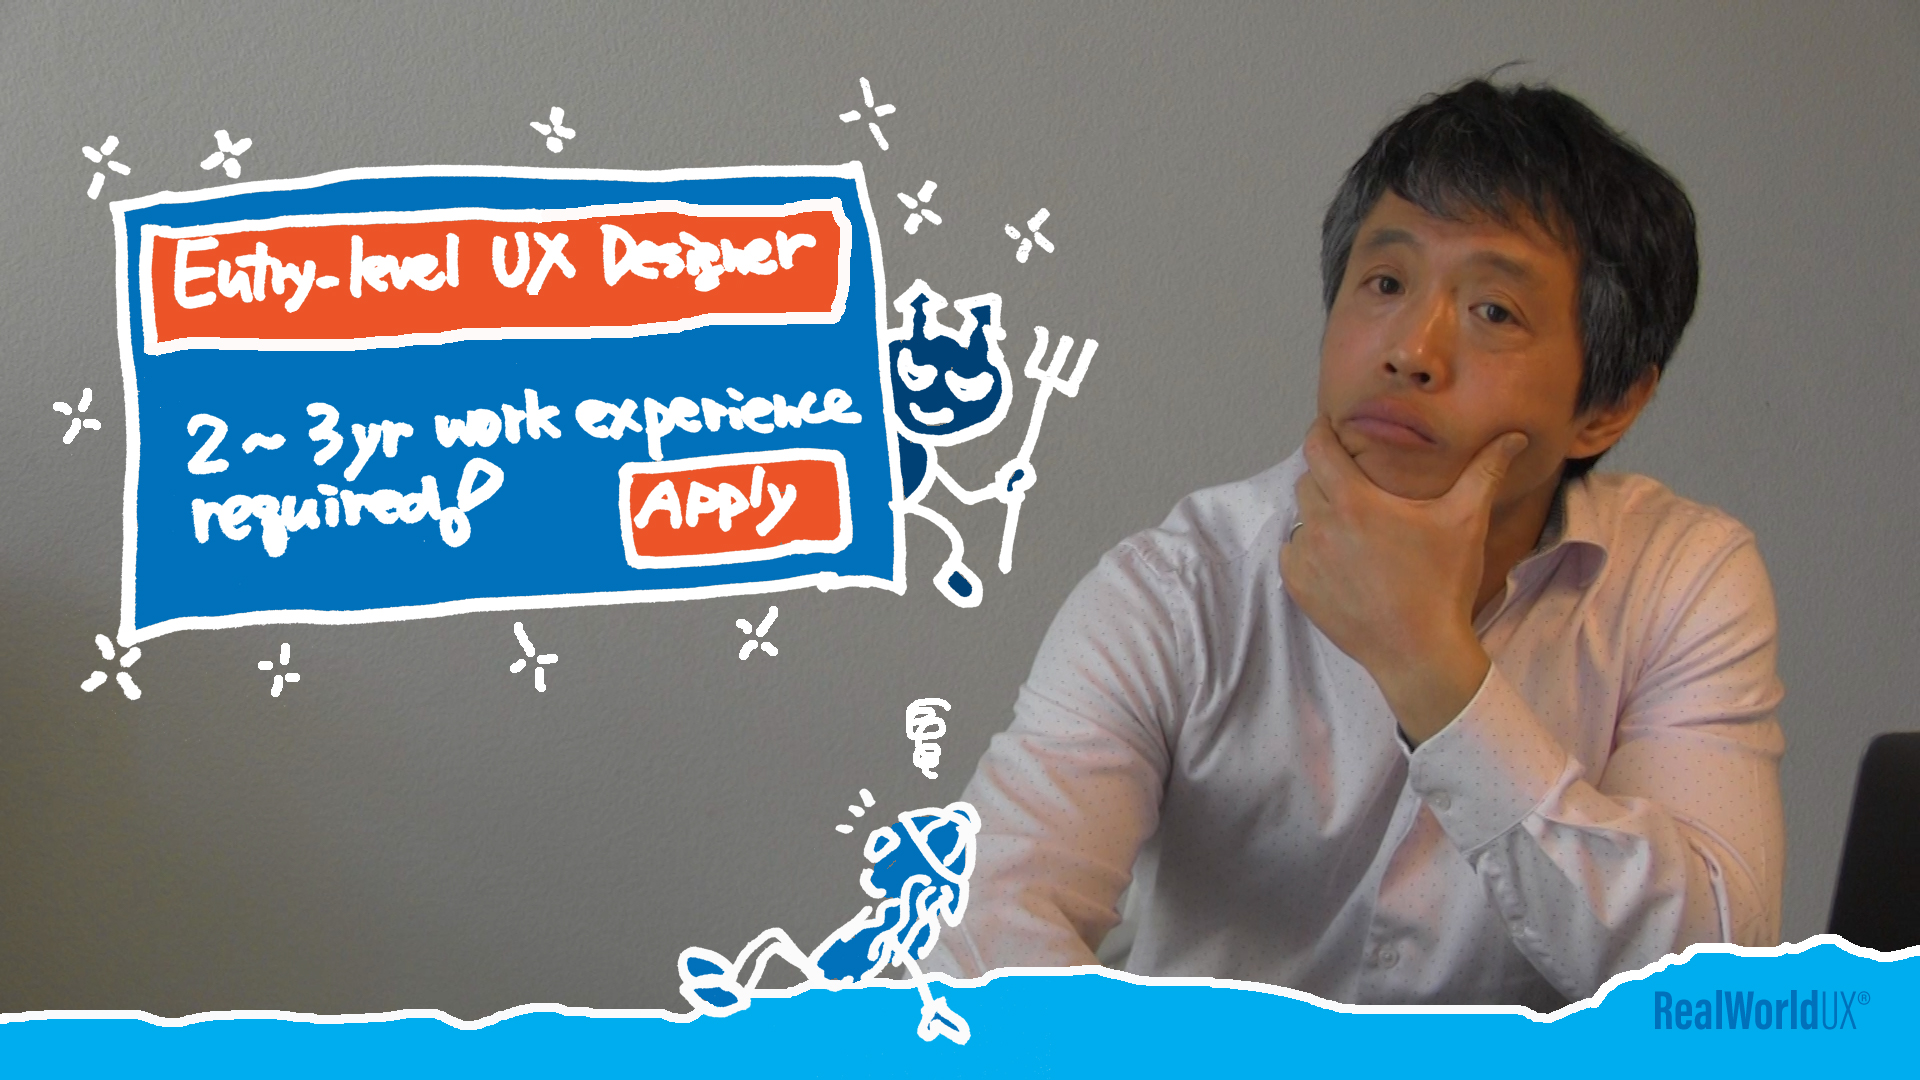 Job posting for an entry-level UX designer says you are required to have 2-3 year work experience.